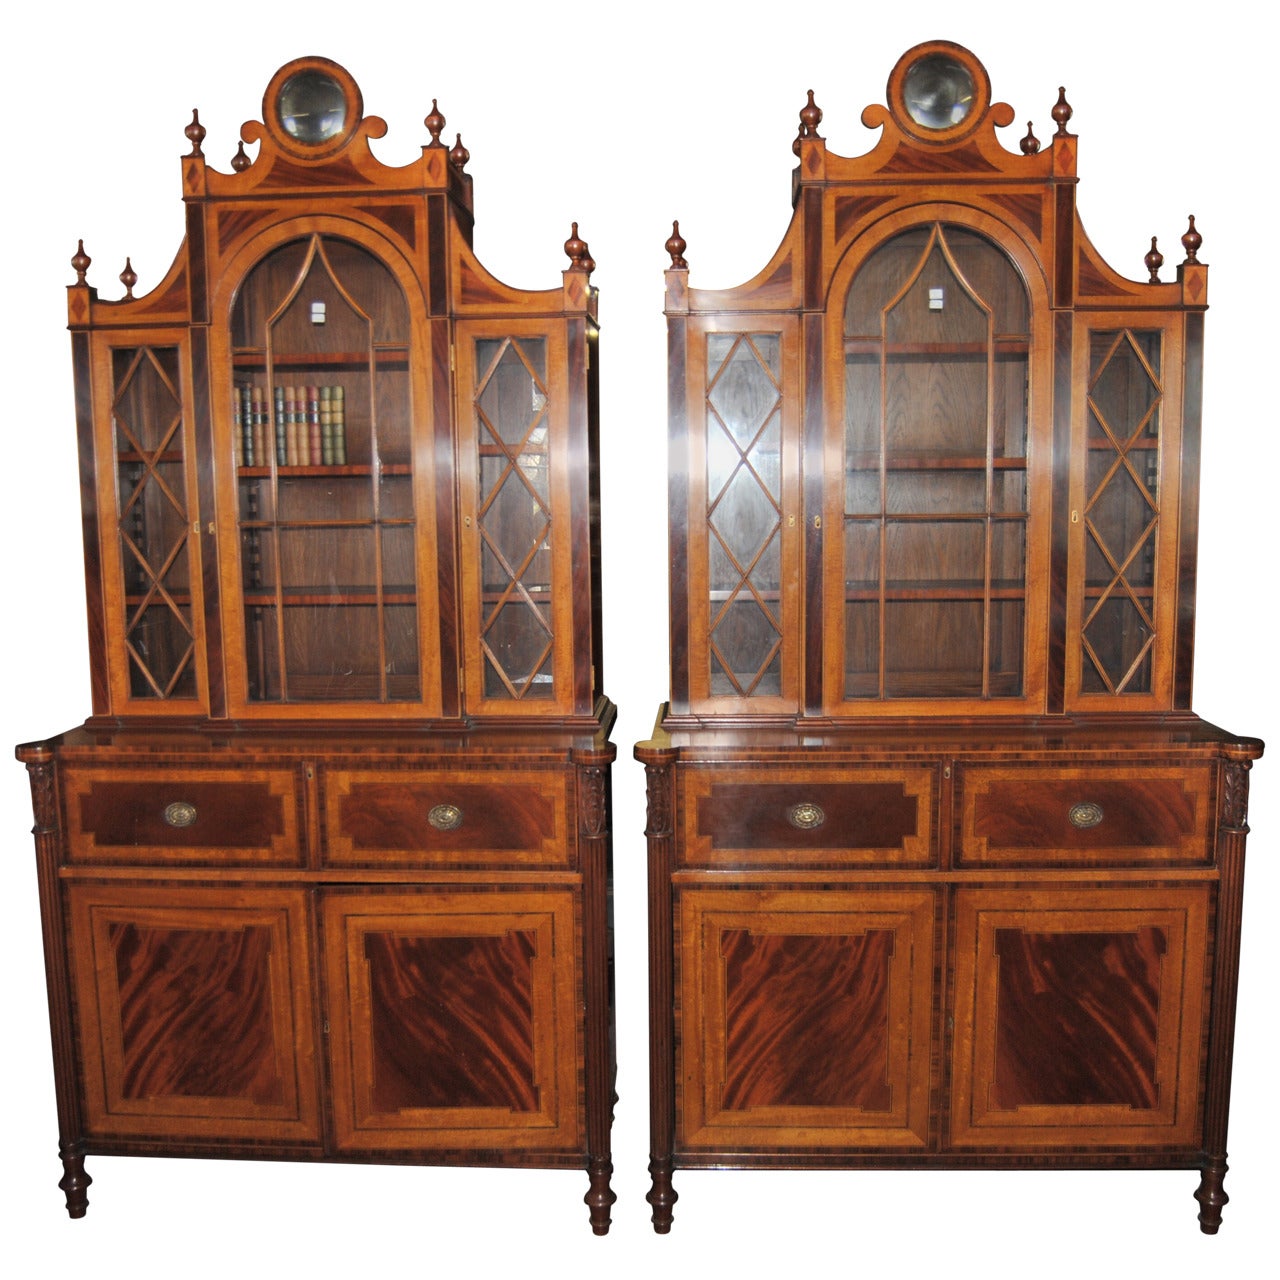 Matched Pair of English Regency Style Bookcases For Sale